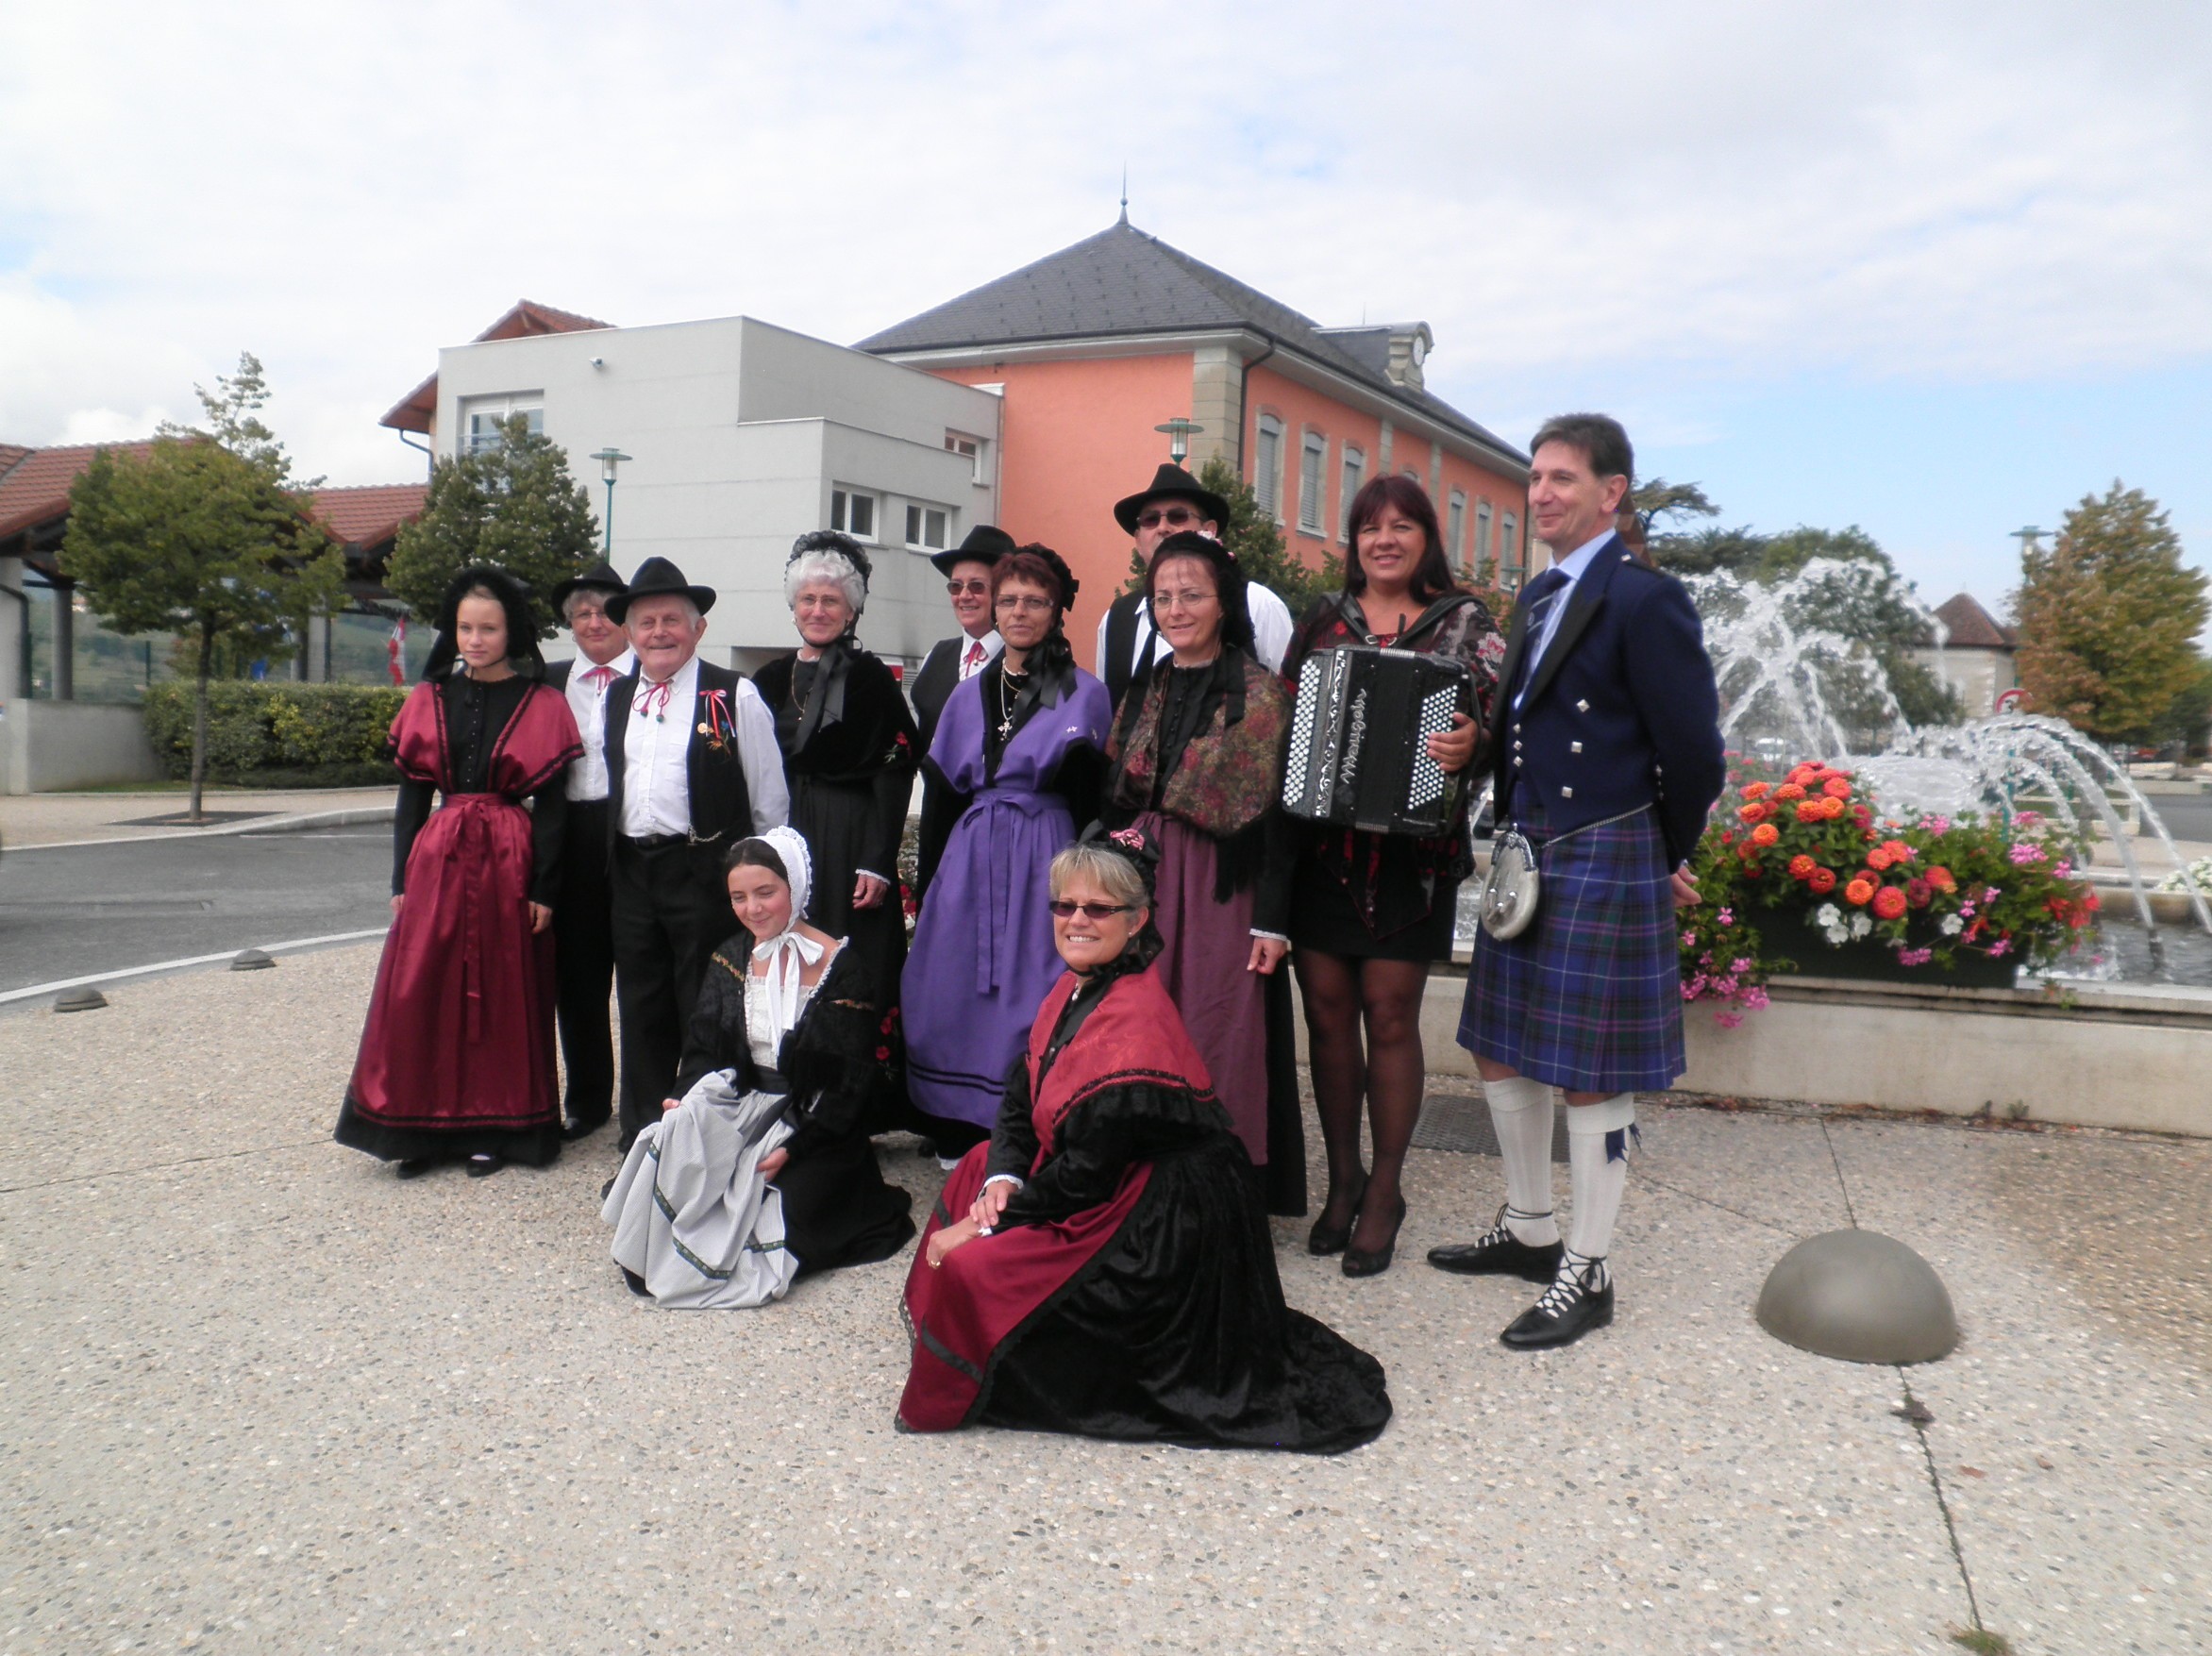 2012_Accueil_groupe folklore_2.JPG